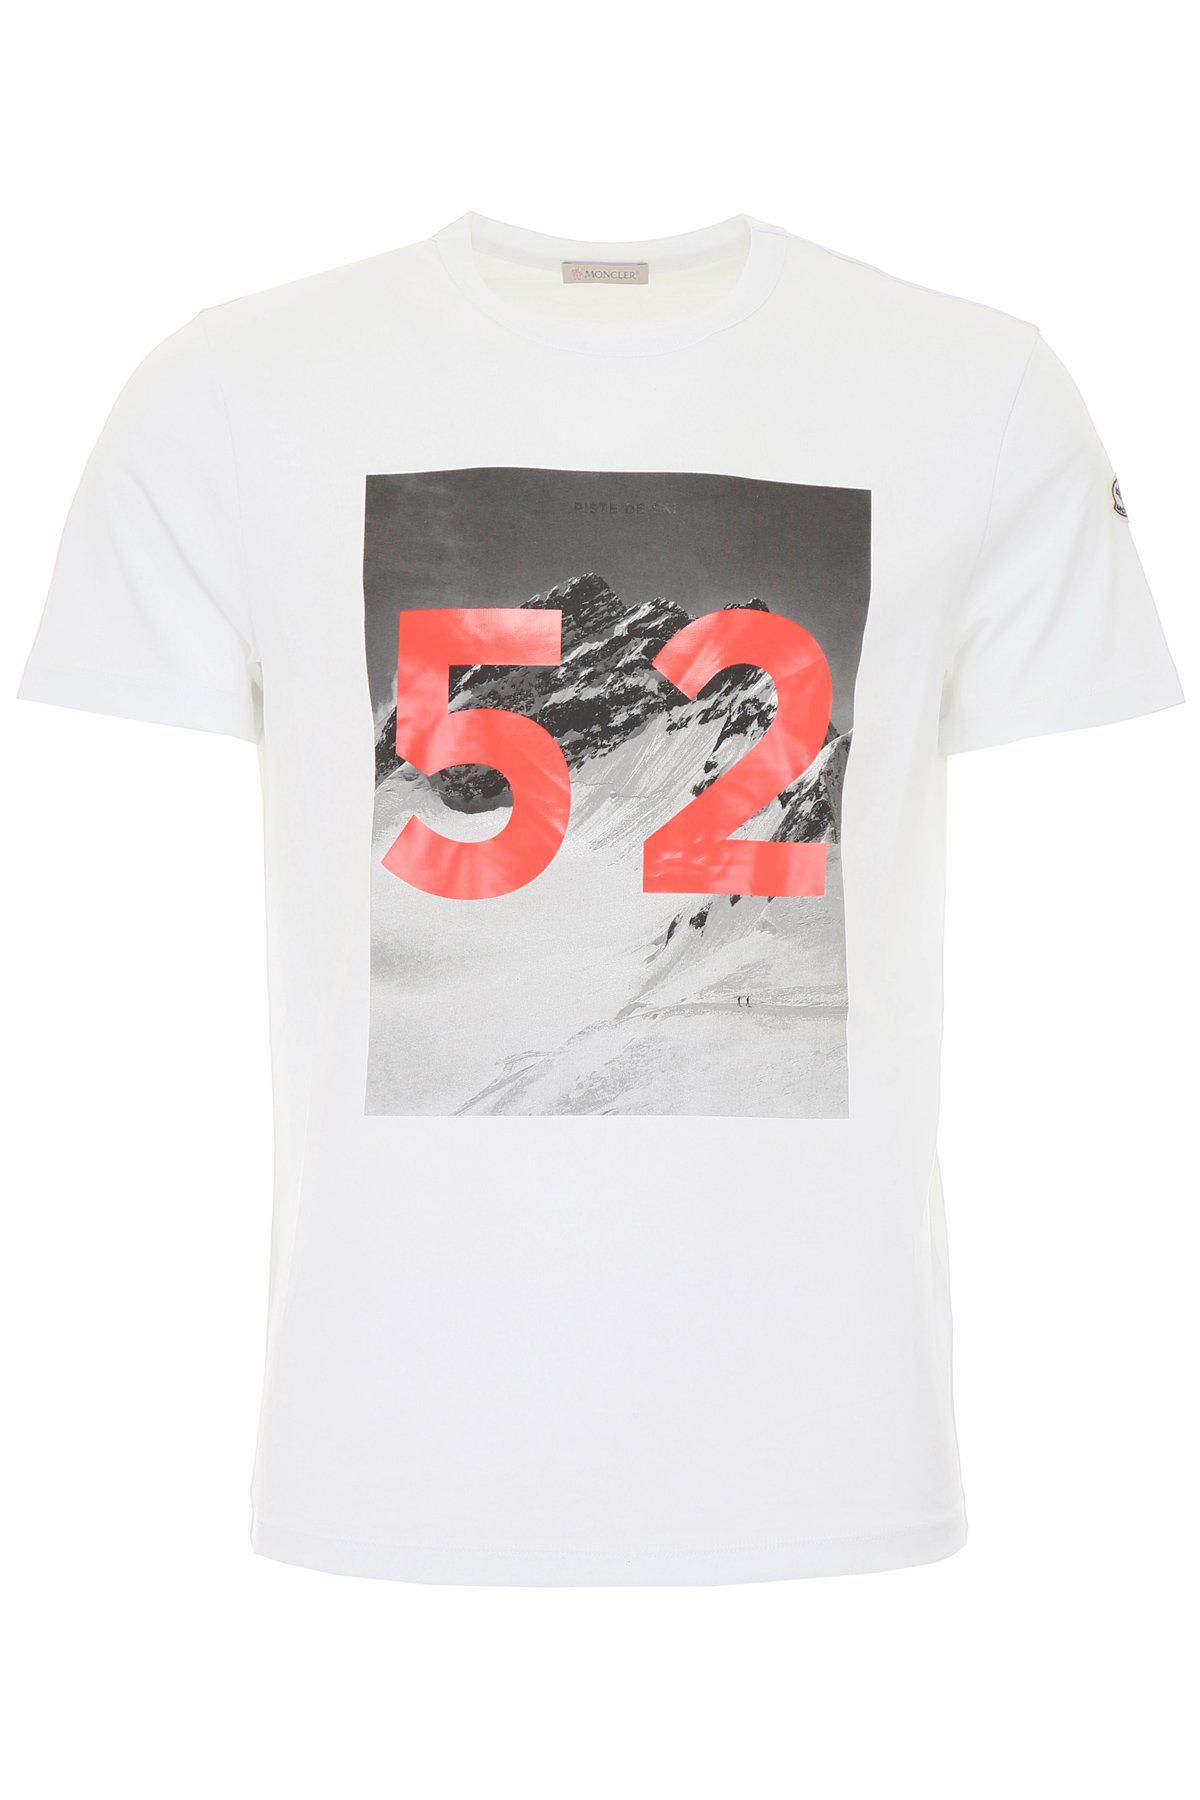 Moncler Cotton 52 T-shirt in White for Men - Lyst